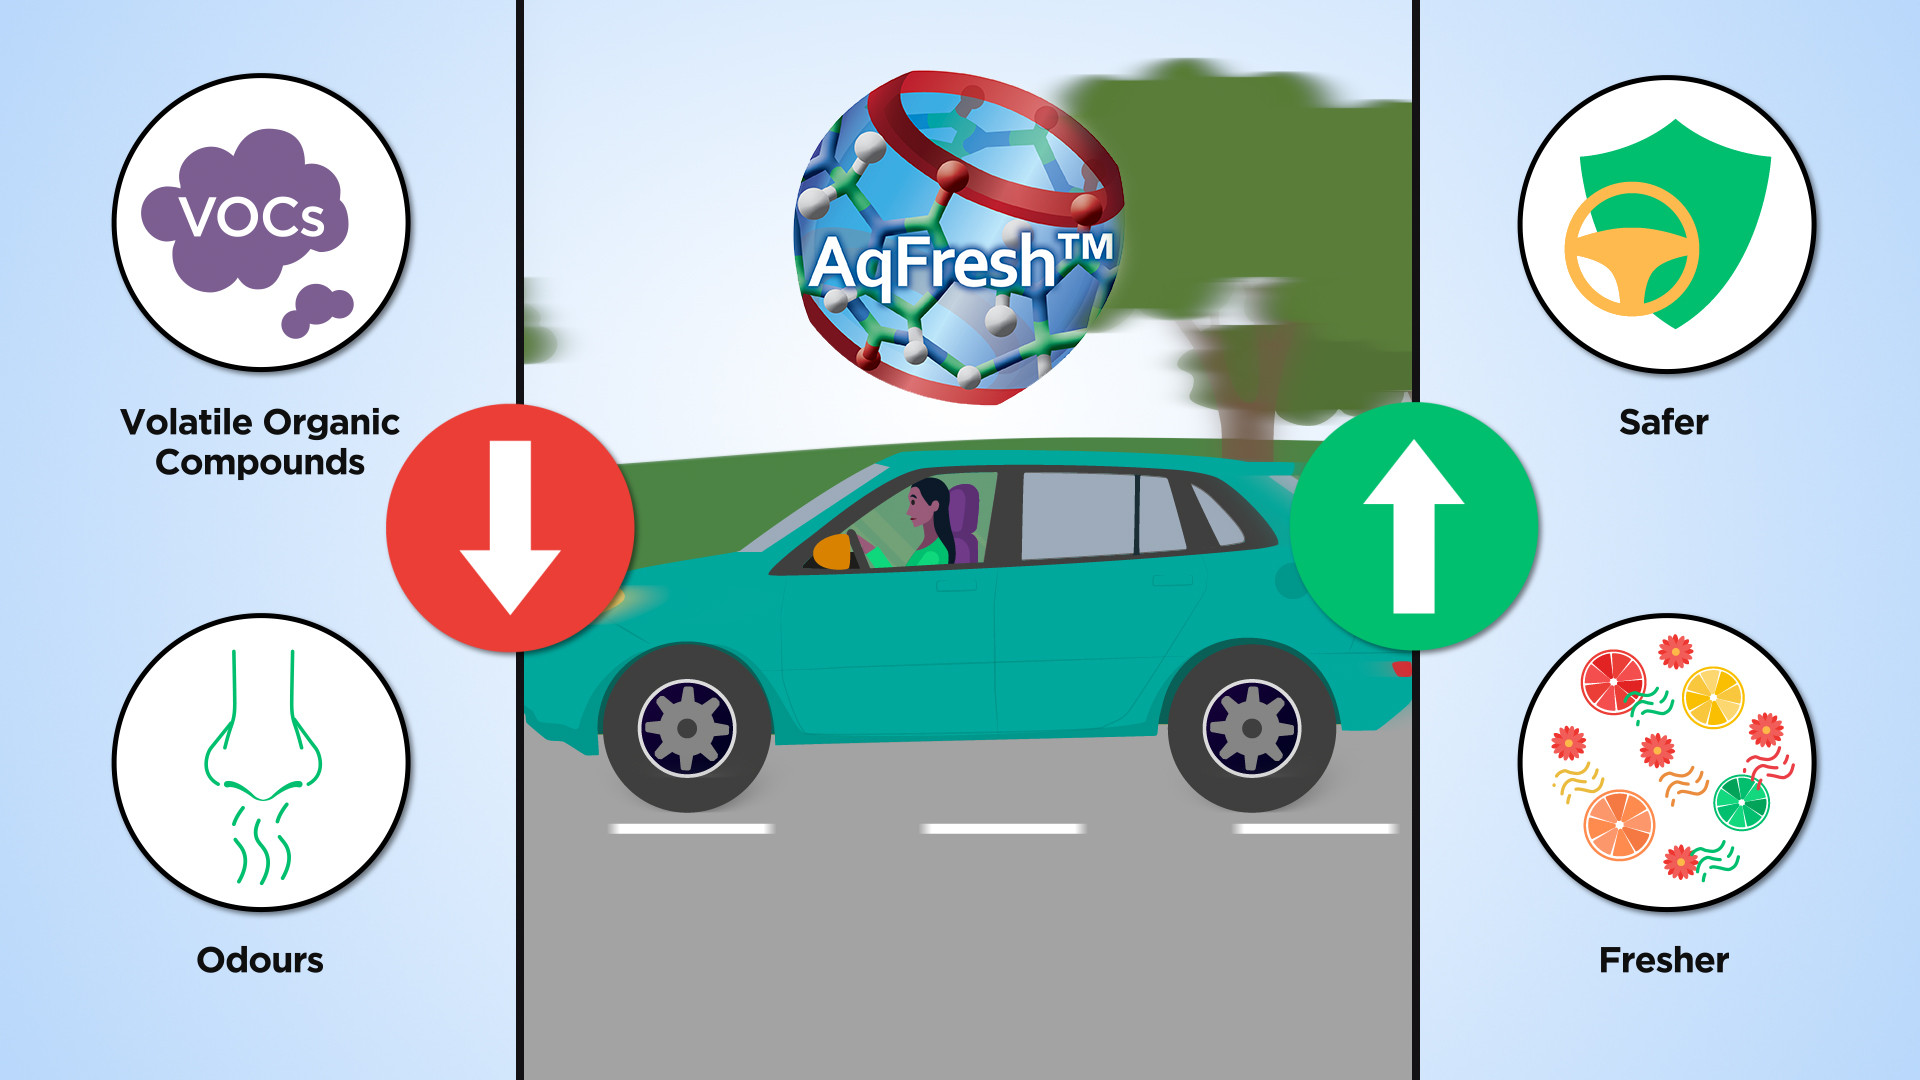 AqFresh is set to have a profound impact on improving vehicle indoor air quality and can be incorporated into nonwovens, coated textiles and plastics. © Aqdot